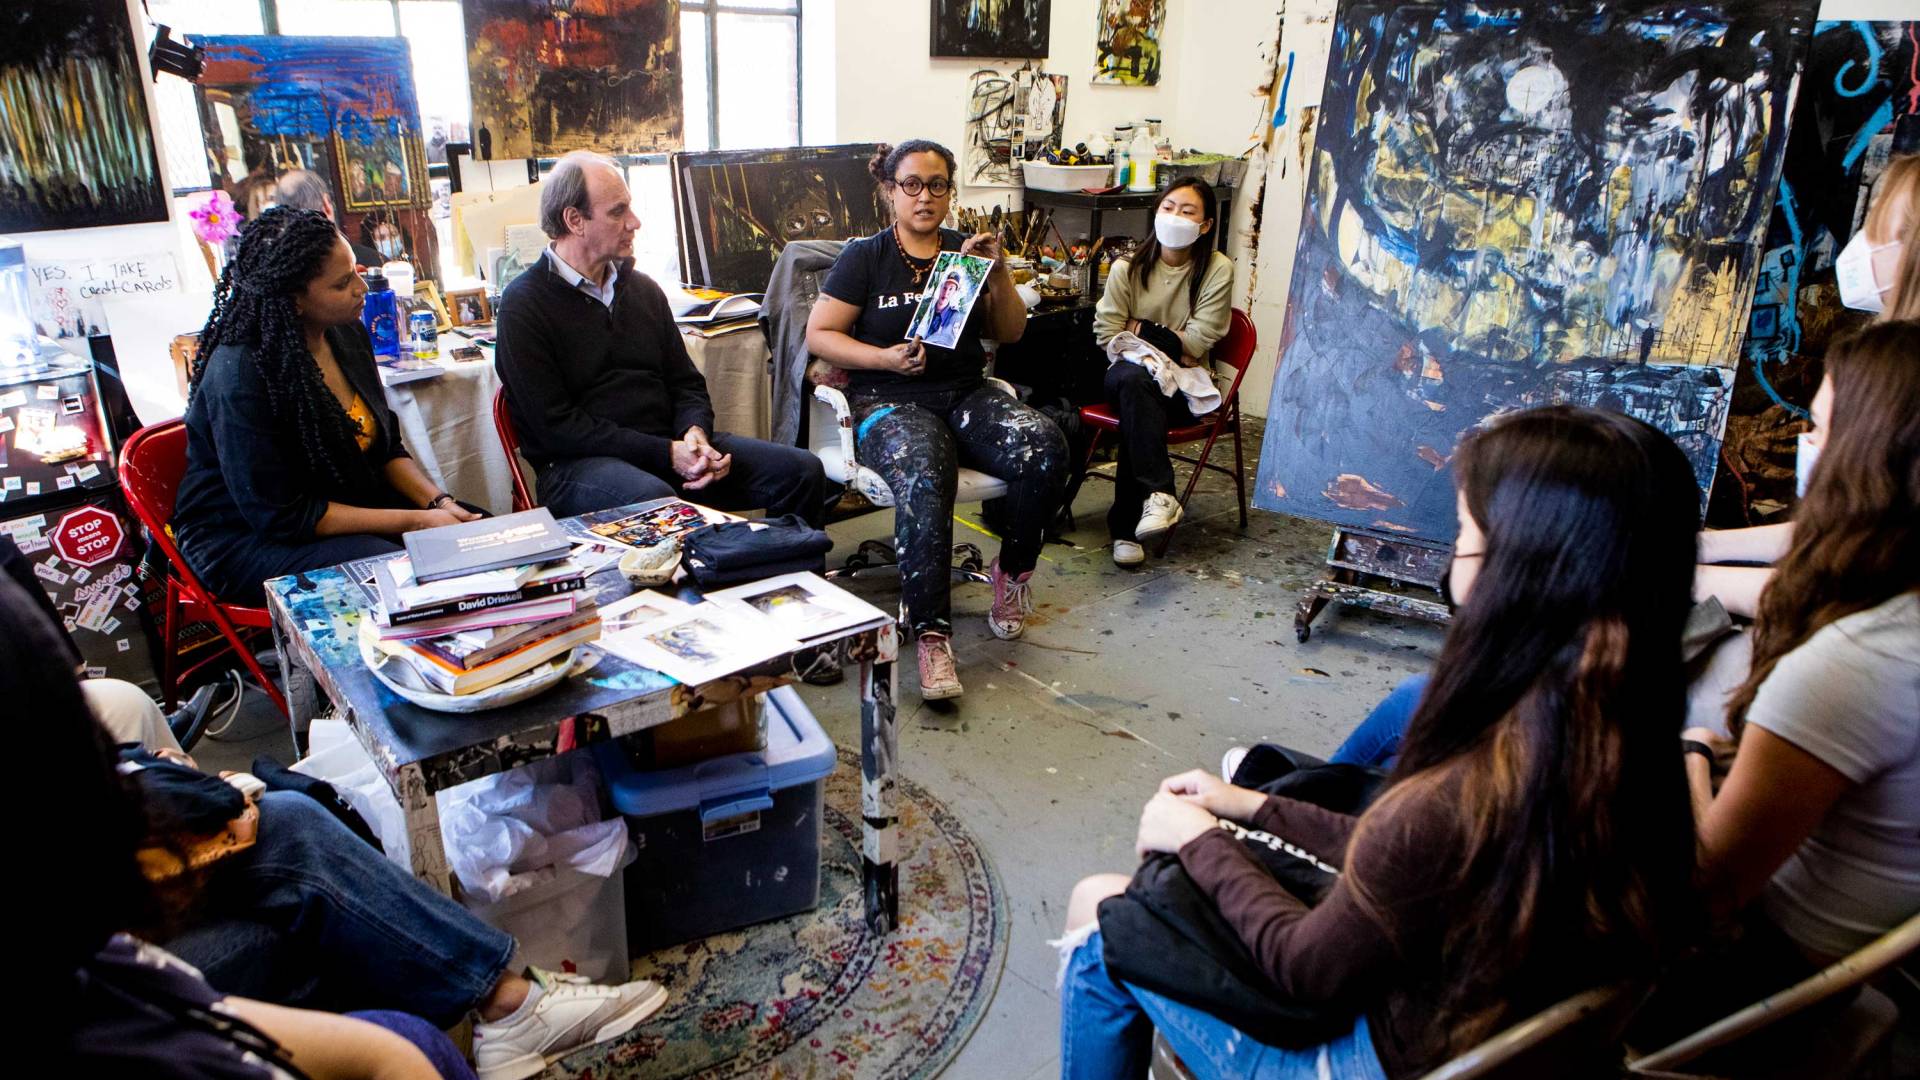 A painter presents her work surrounded by students and professors